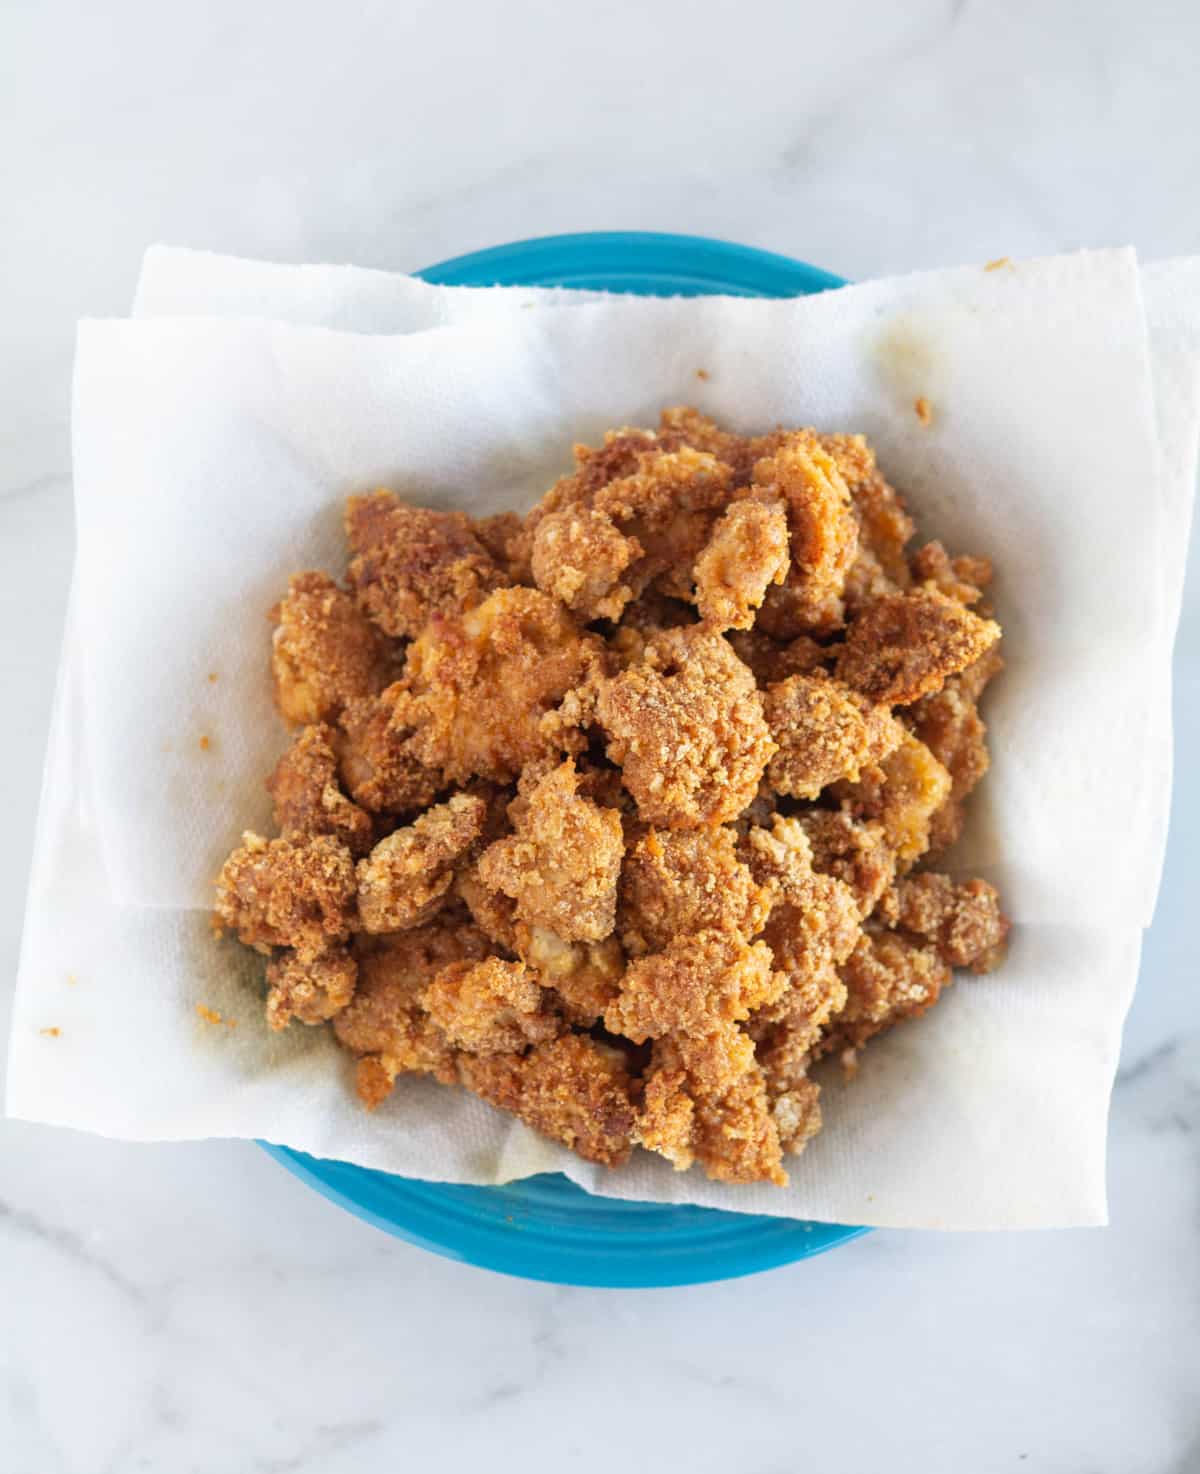 fried chicken pieces on paper-towel-lined plate